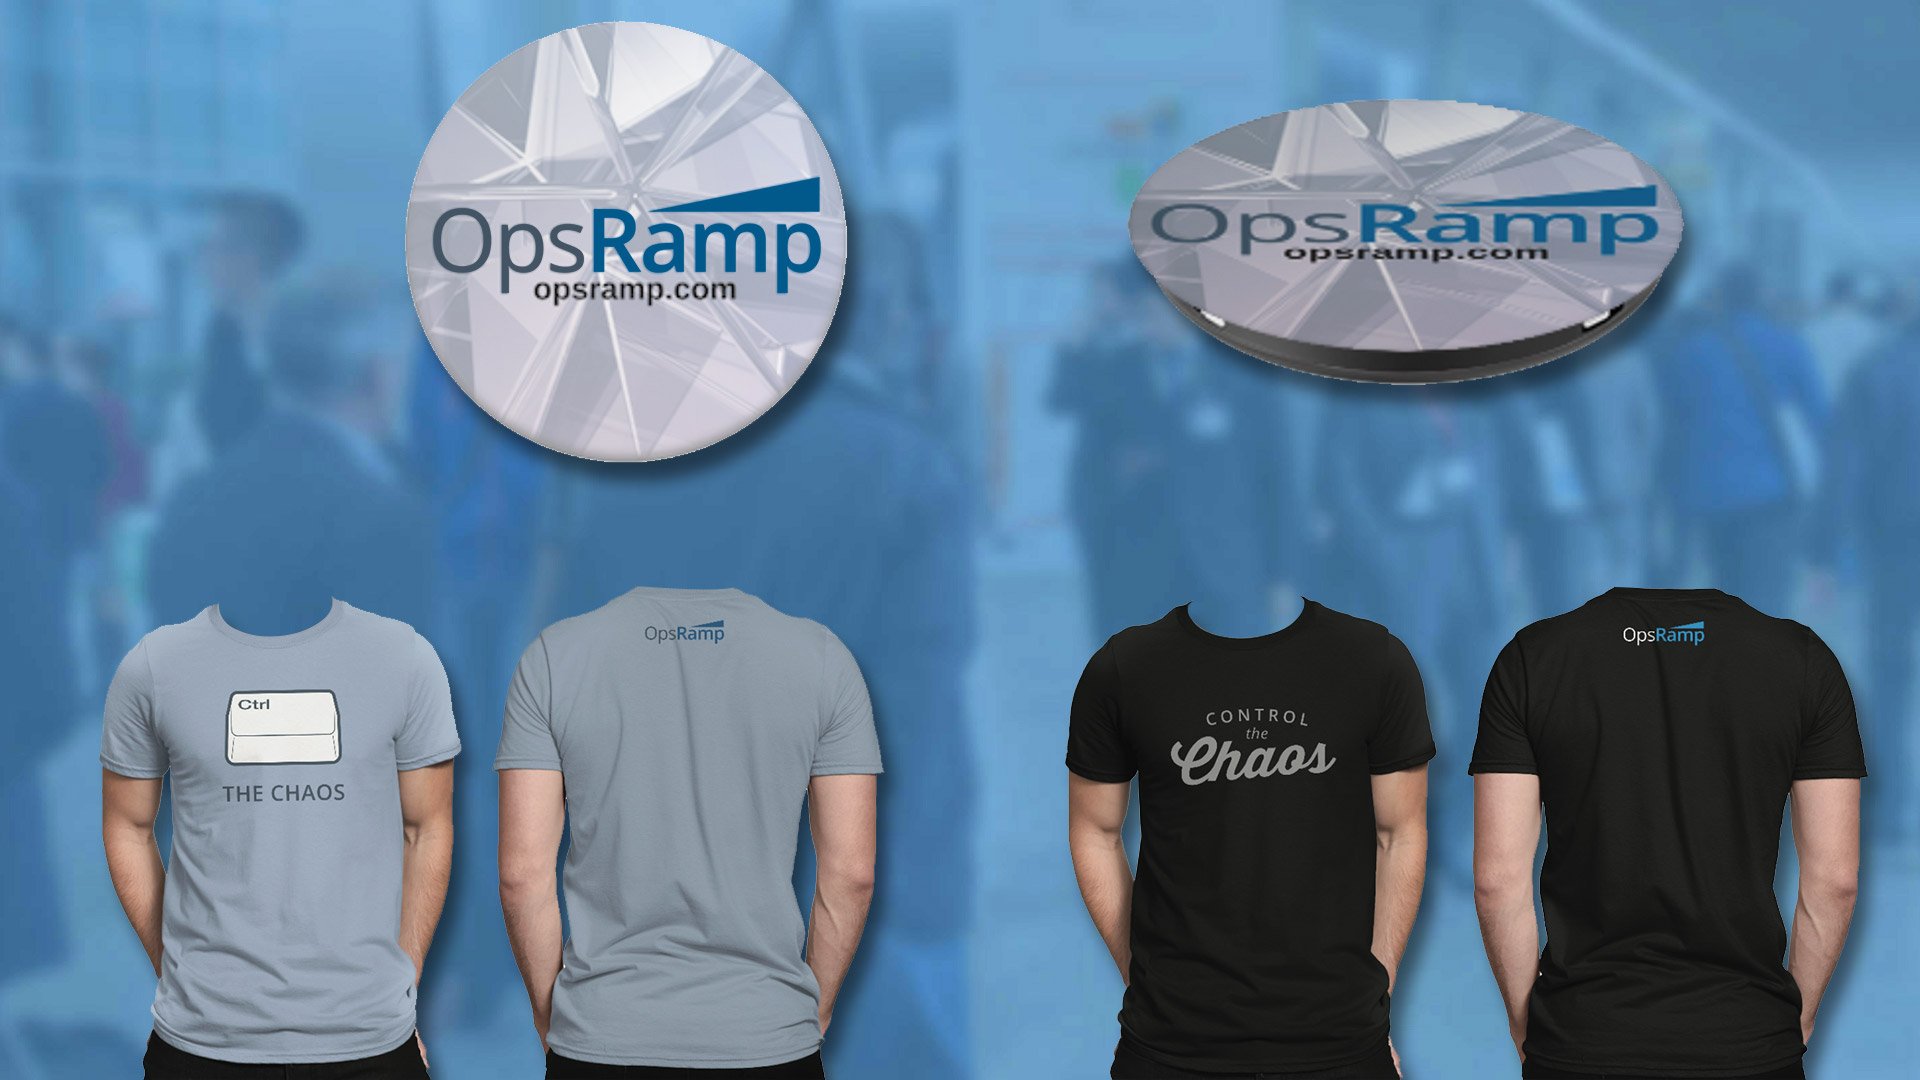 Get some cool OpsRamp Swag!